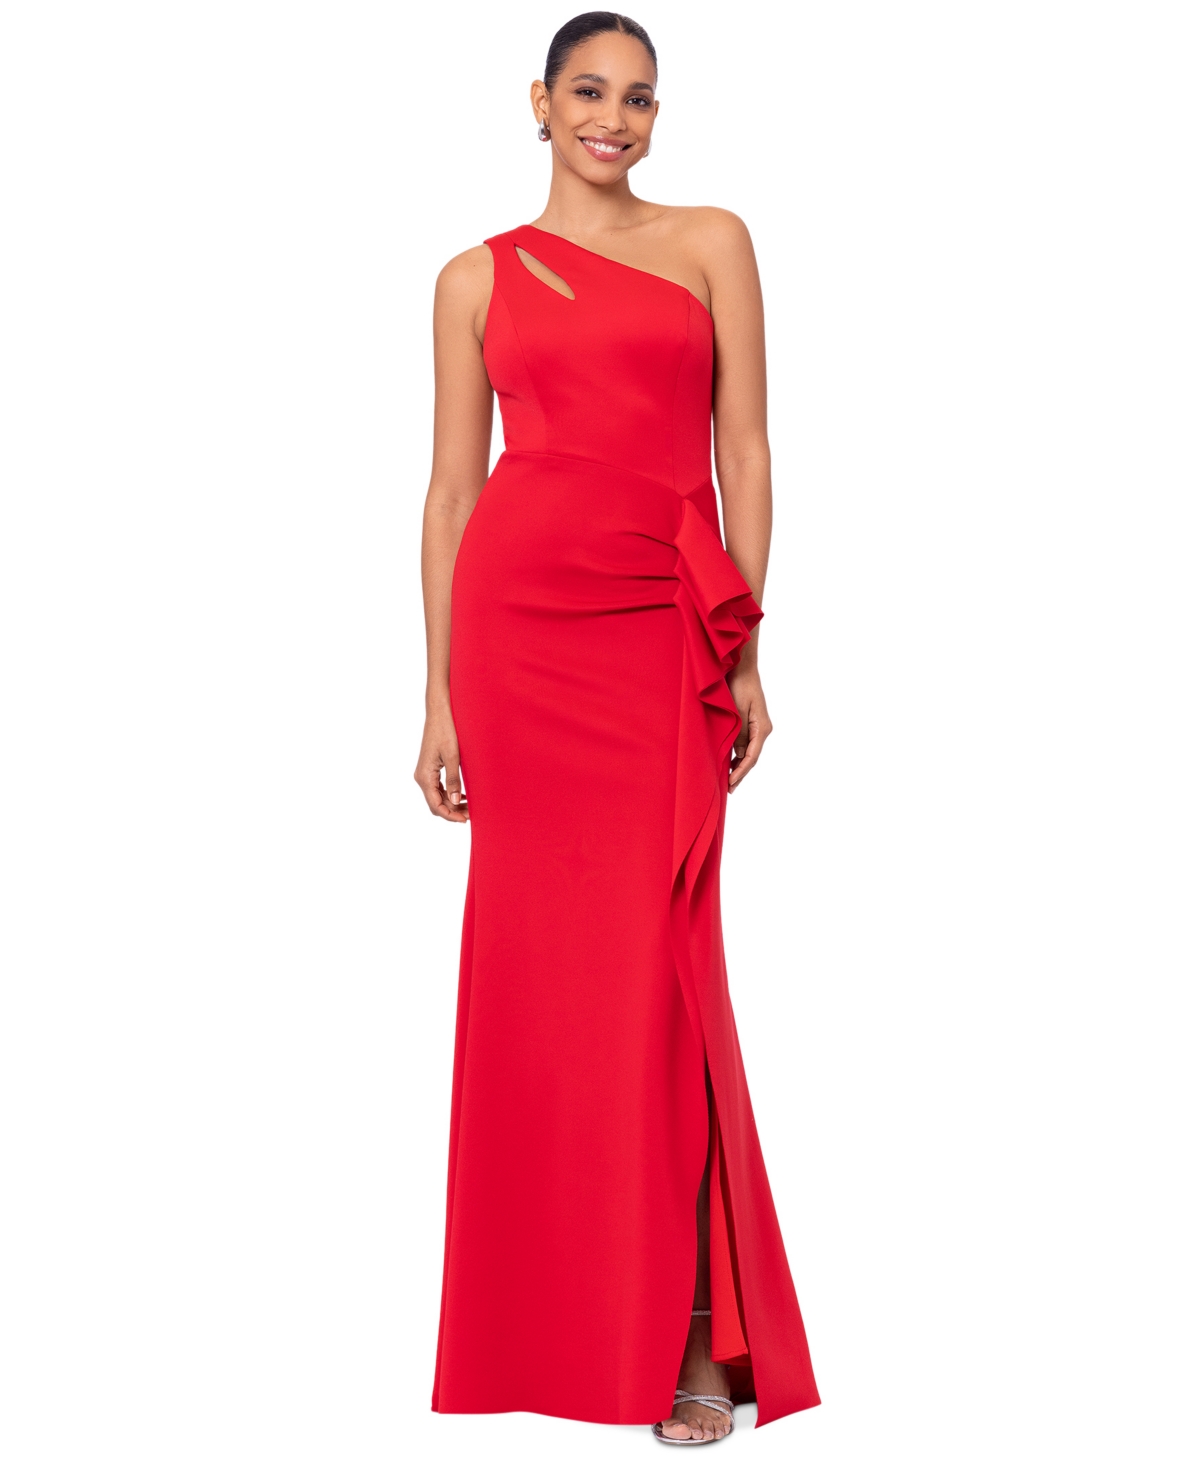 Women's Ruffled One-Shoulder Gown - Red